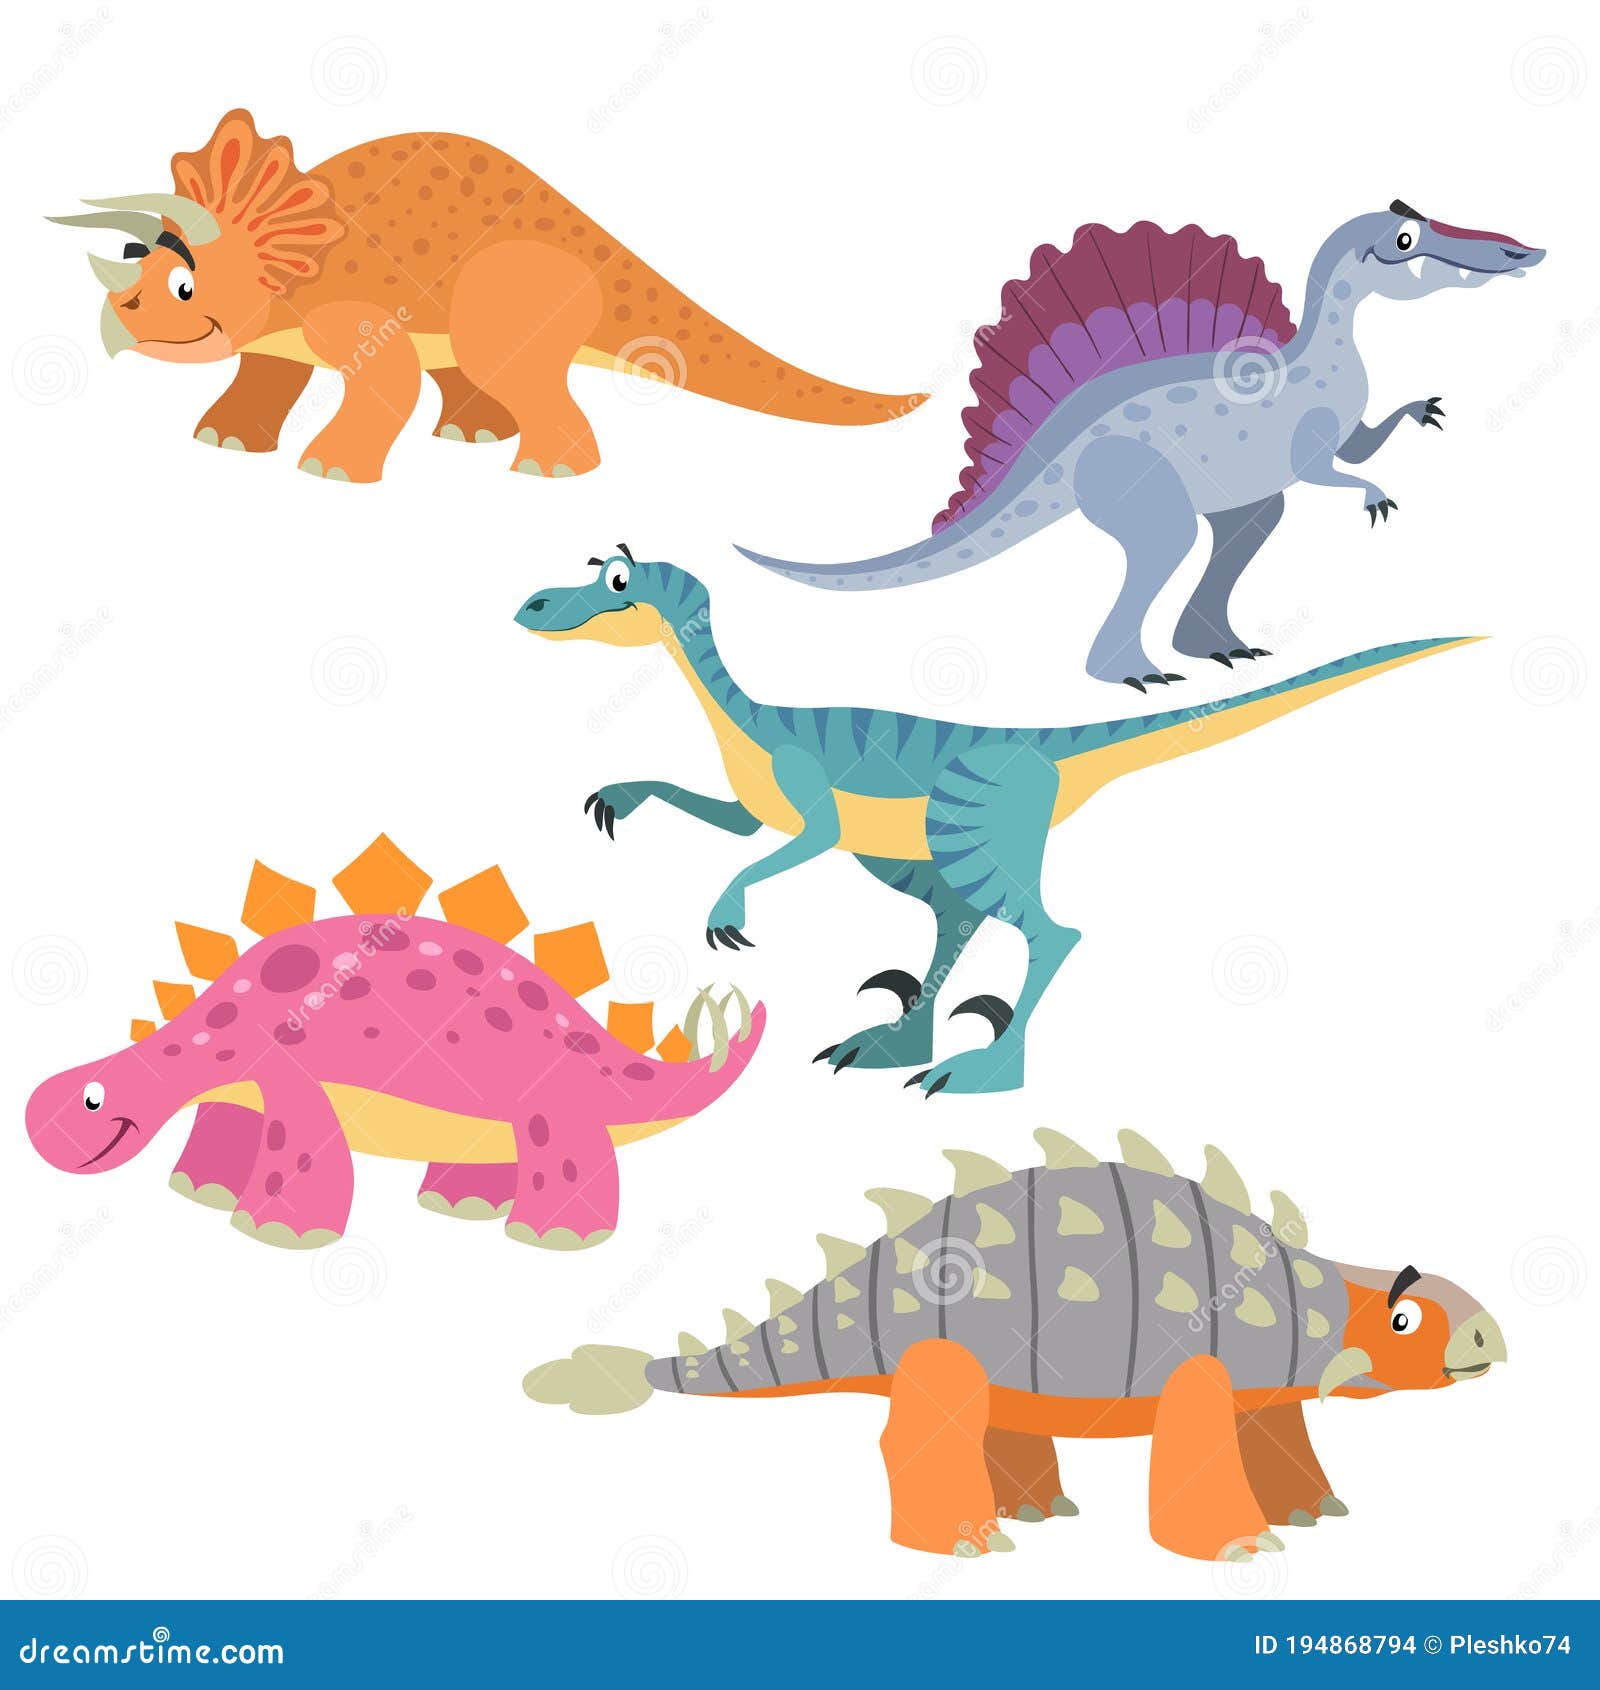 Funny Cute Dinosaurs Set Triceratops Velociraptor Ankylosaurus Spinosaurus And Triceratops Cartoon Flat Style Stock Vector Illustration Of Draw Education